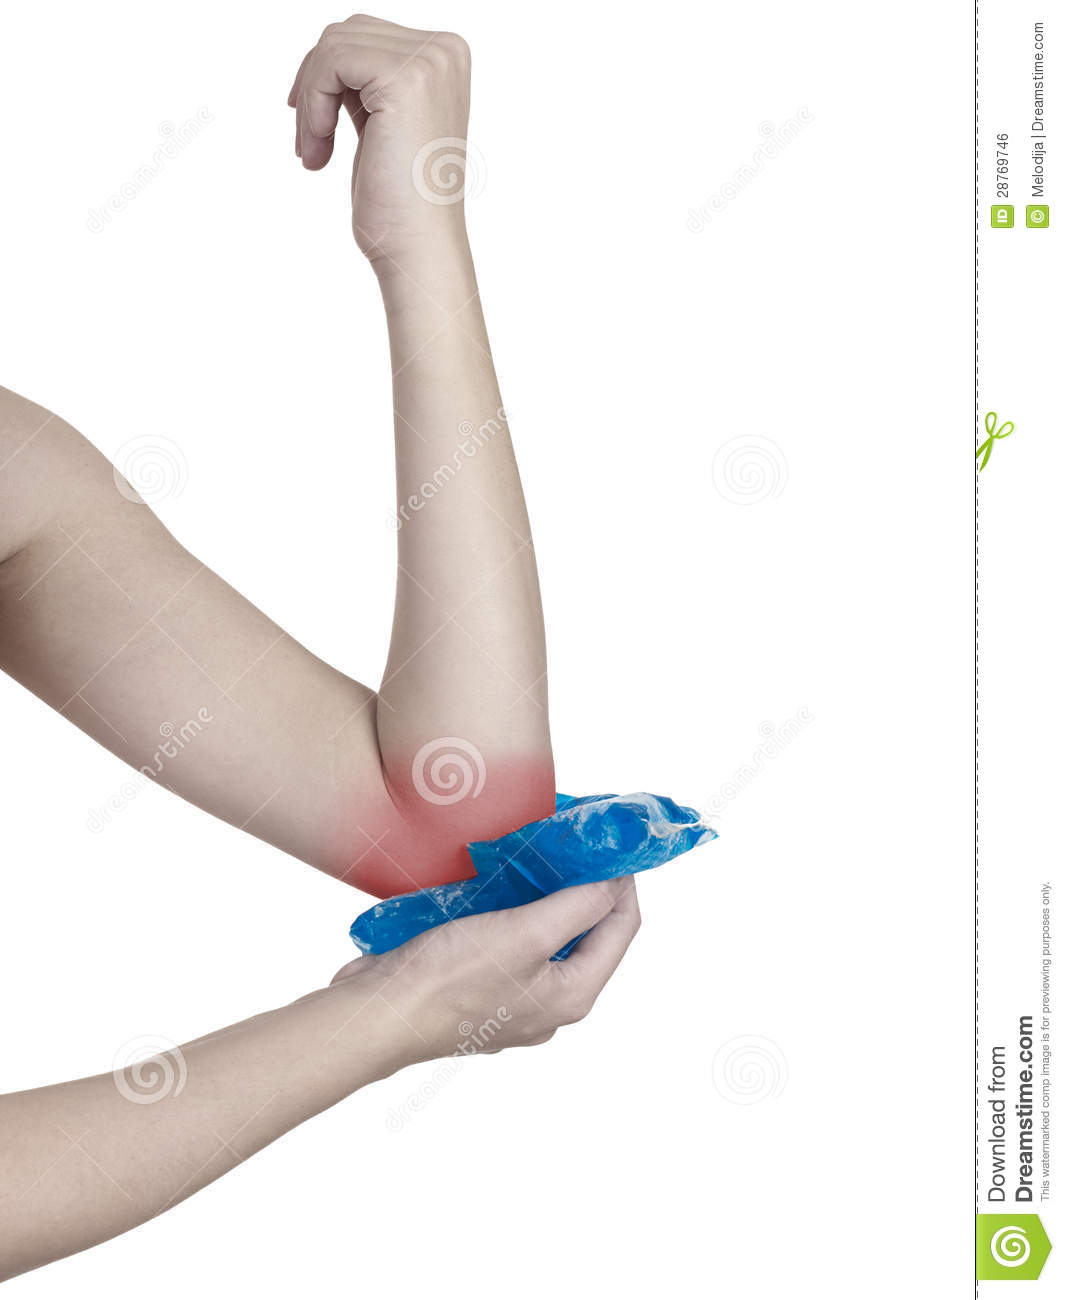 Cool Gel Pack On A Swollen Hurting Elbow  Royalty Free Stock Image